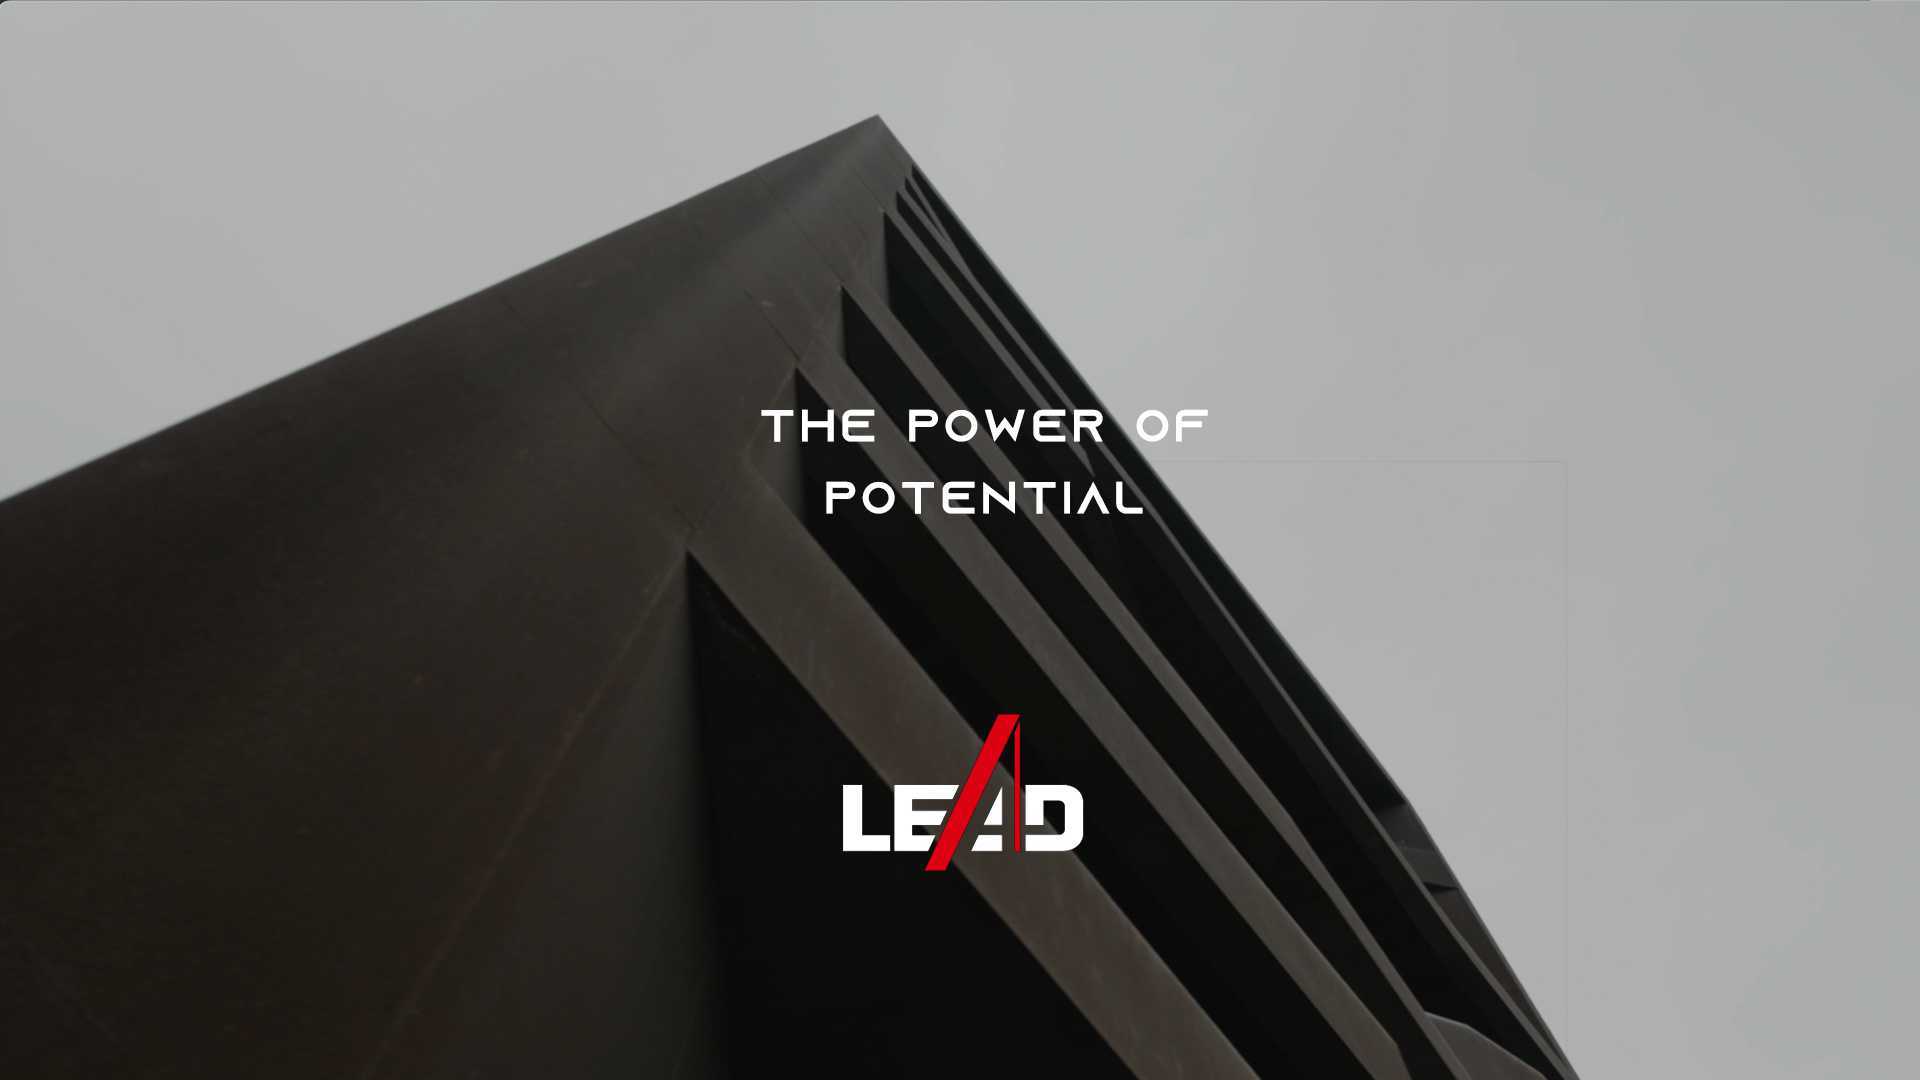 LEAD - The Power of Potential